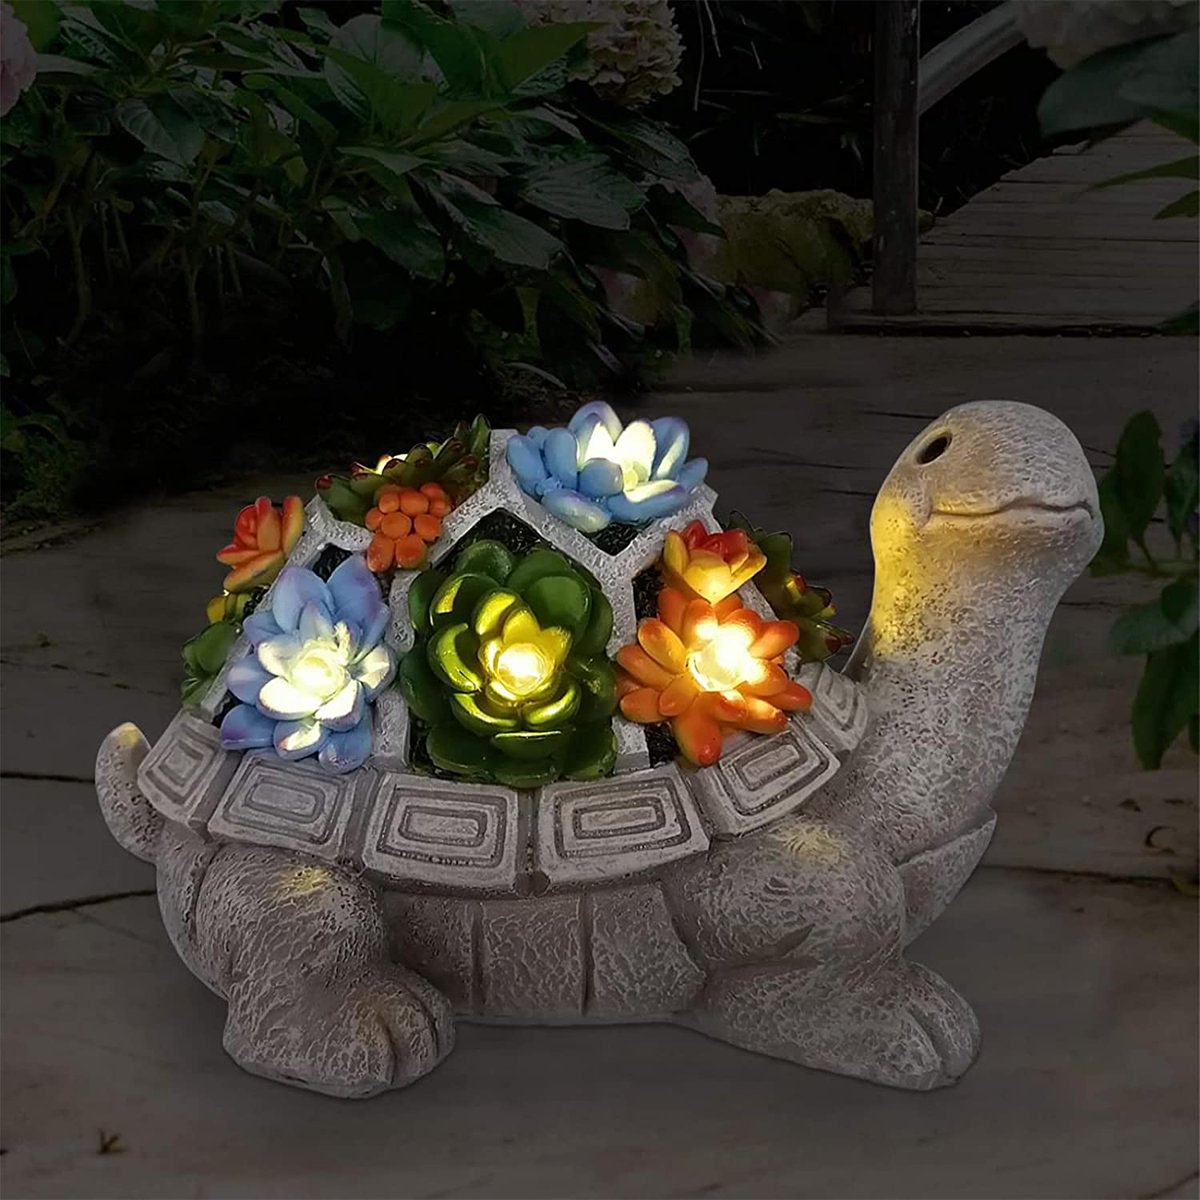 Garden Outdoor Statues Turtle with Succulent and 7 LED Lights #freshfinds #gardenstatues #amazonchoice #loveplants #succulent
Add a little joy to your garden with #nacome

Order Link: amzn.to/3Qay11k